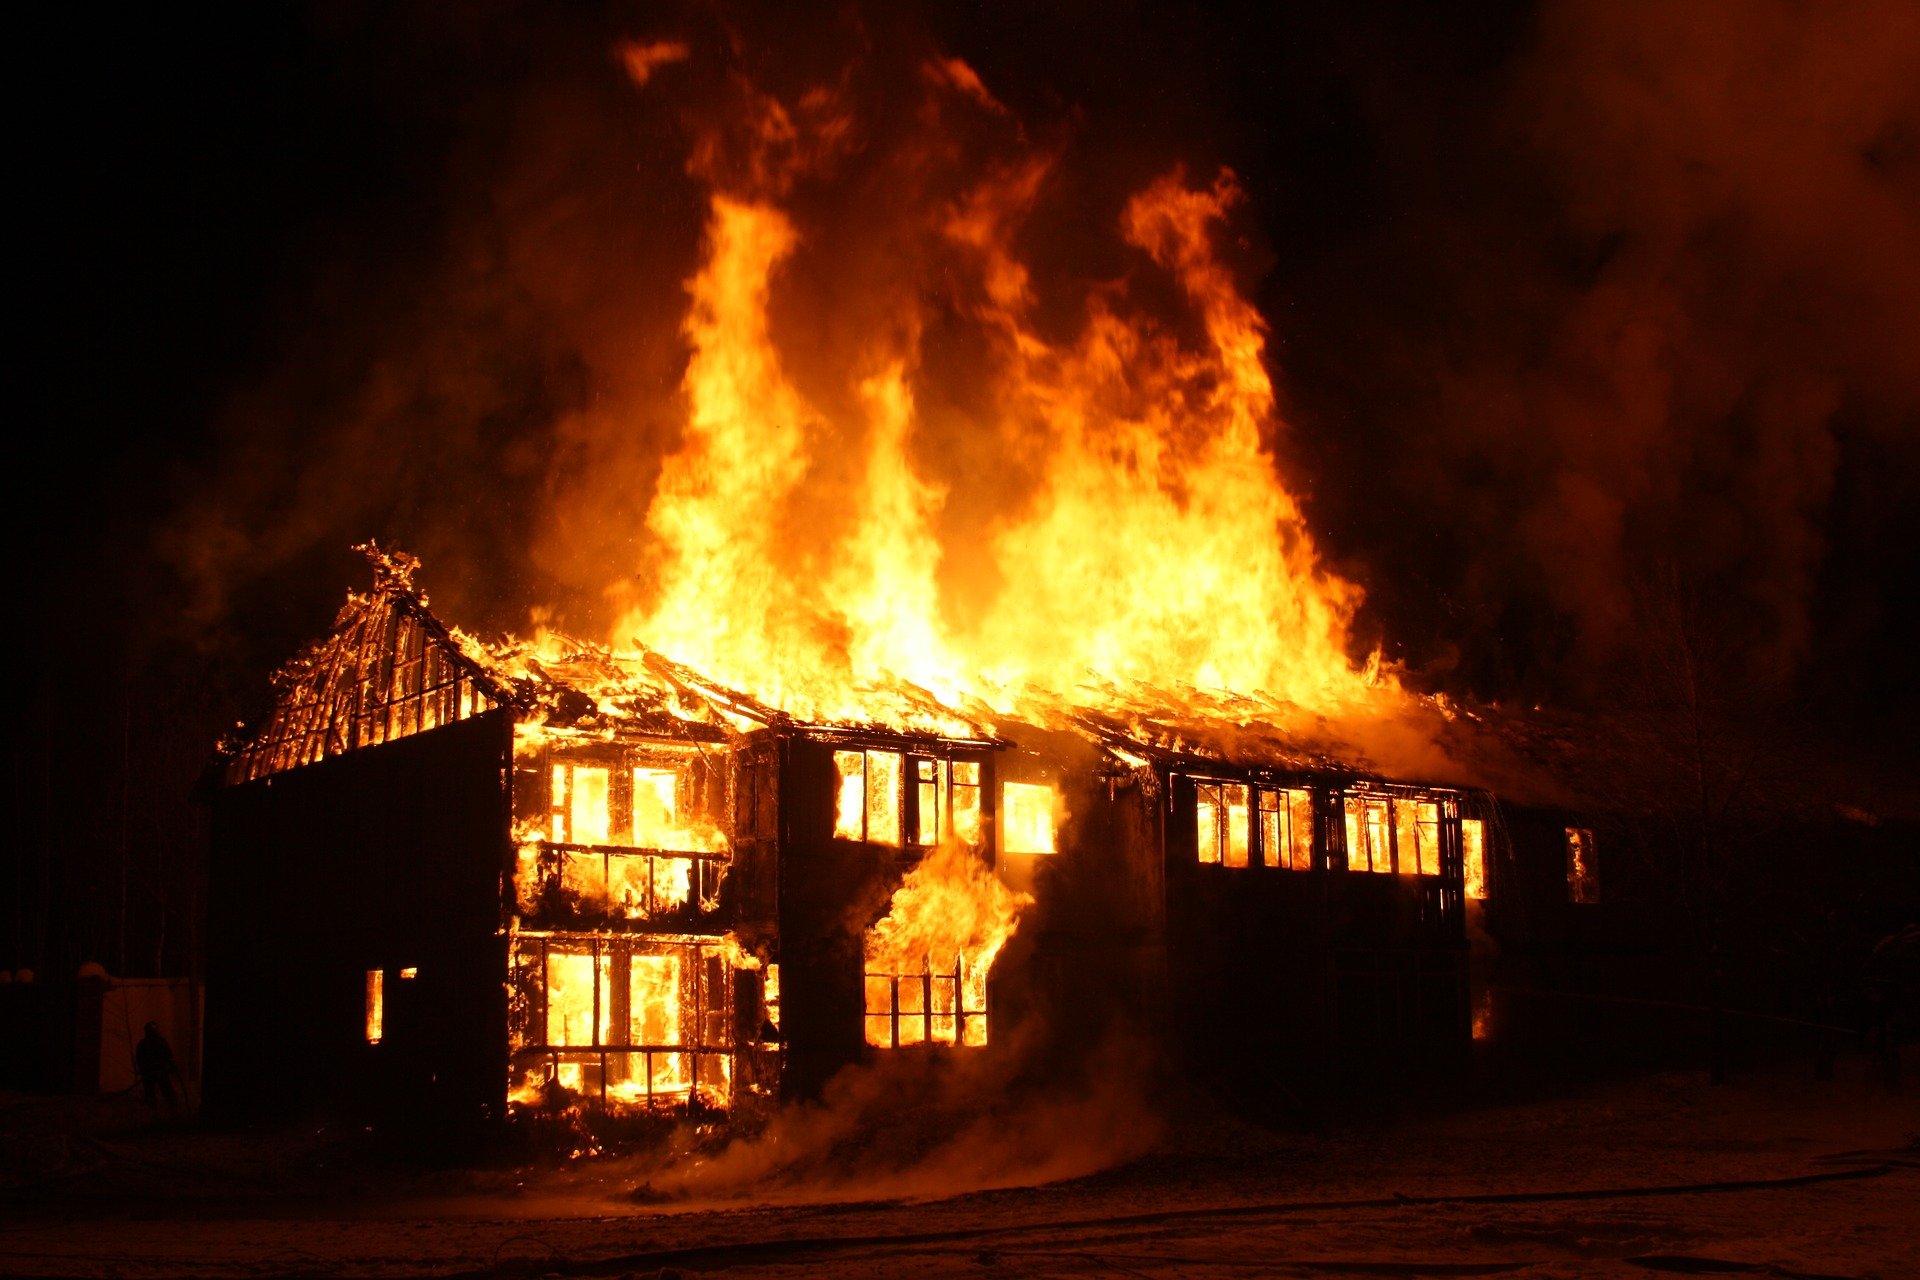 Pictured - A burning house at night | Source: Pixabay 